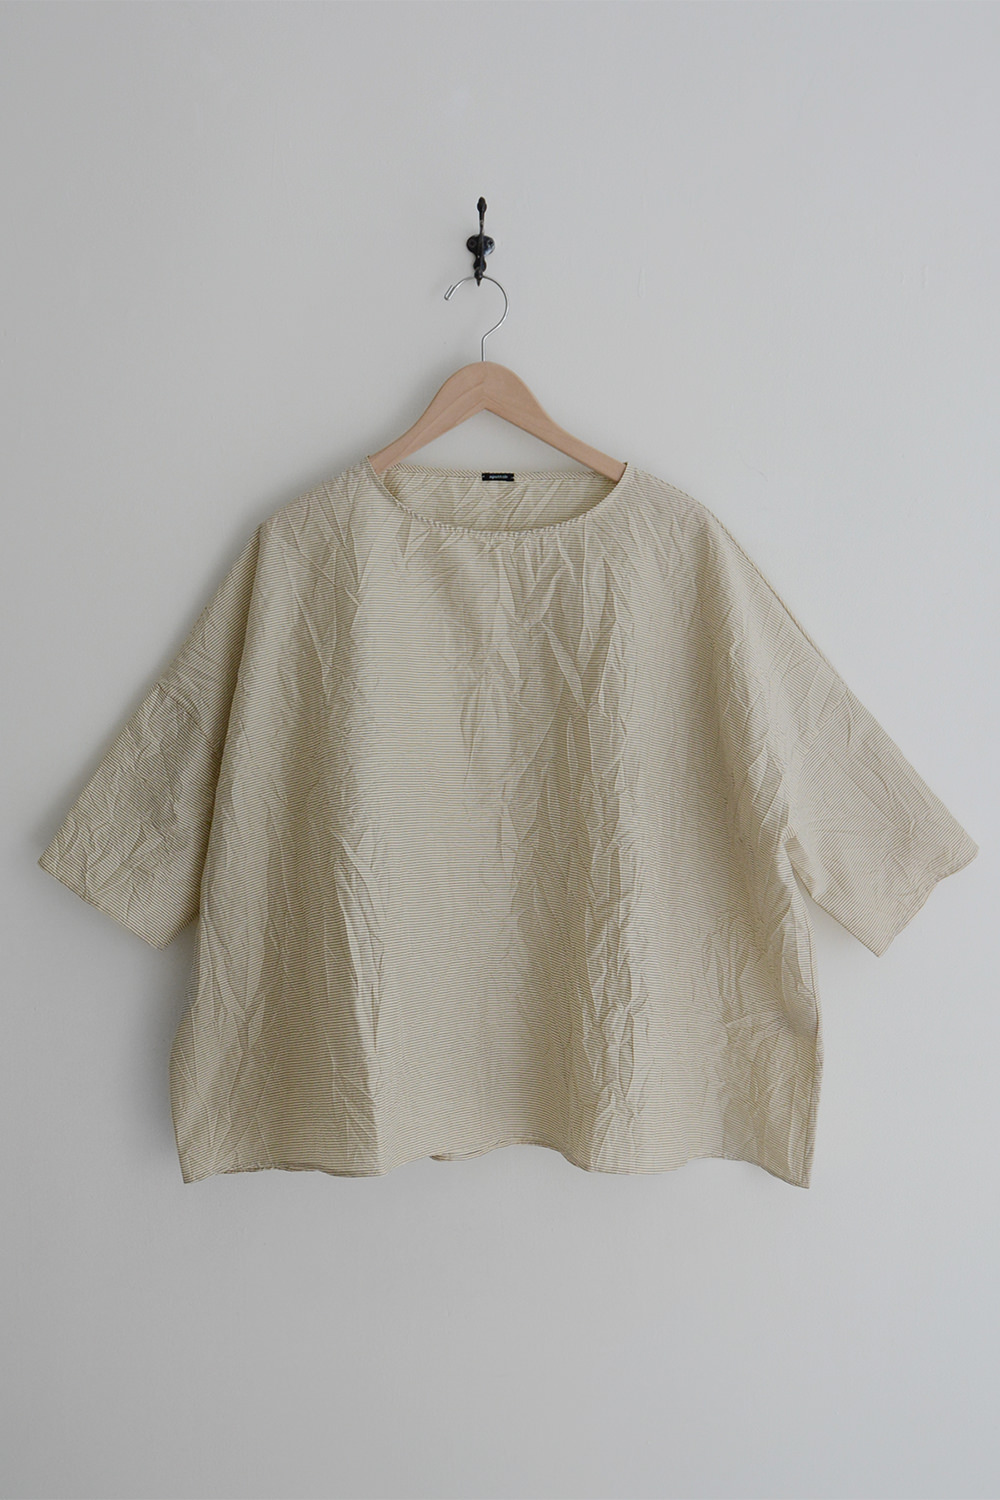 makie, makie home, apuntob(a.b)、a.b、silk cotton blouse、シルクコットンブラウス、made in Italy、women's、ウィメンズ